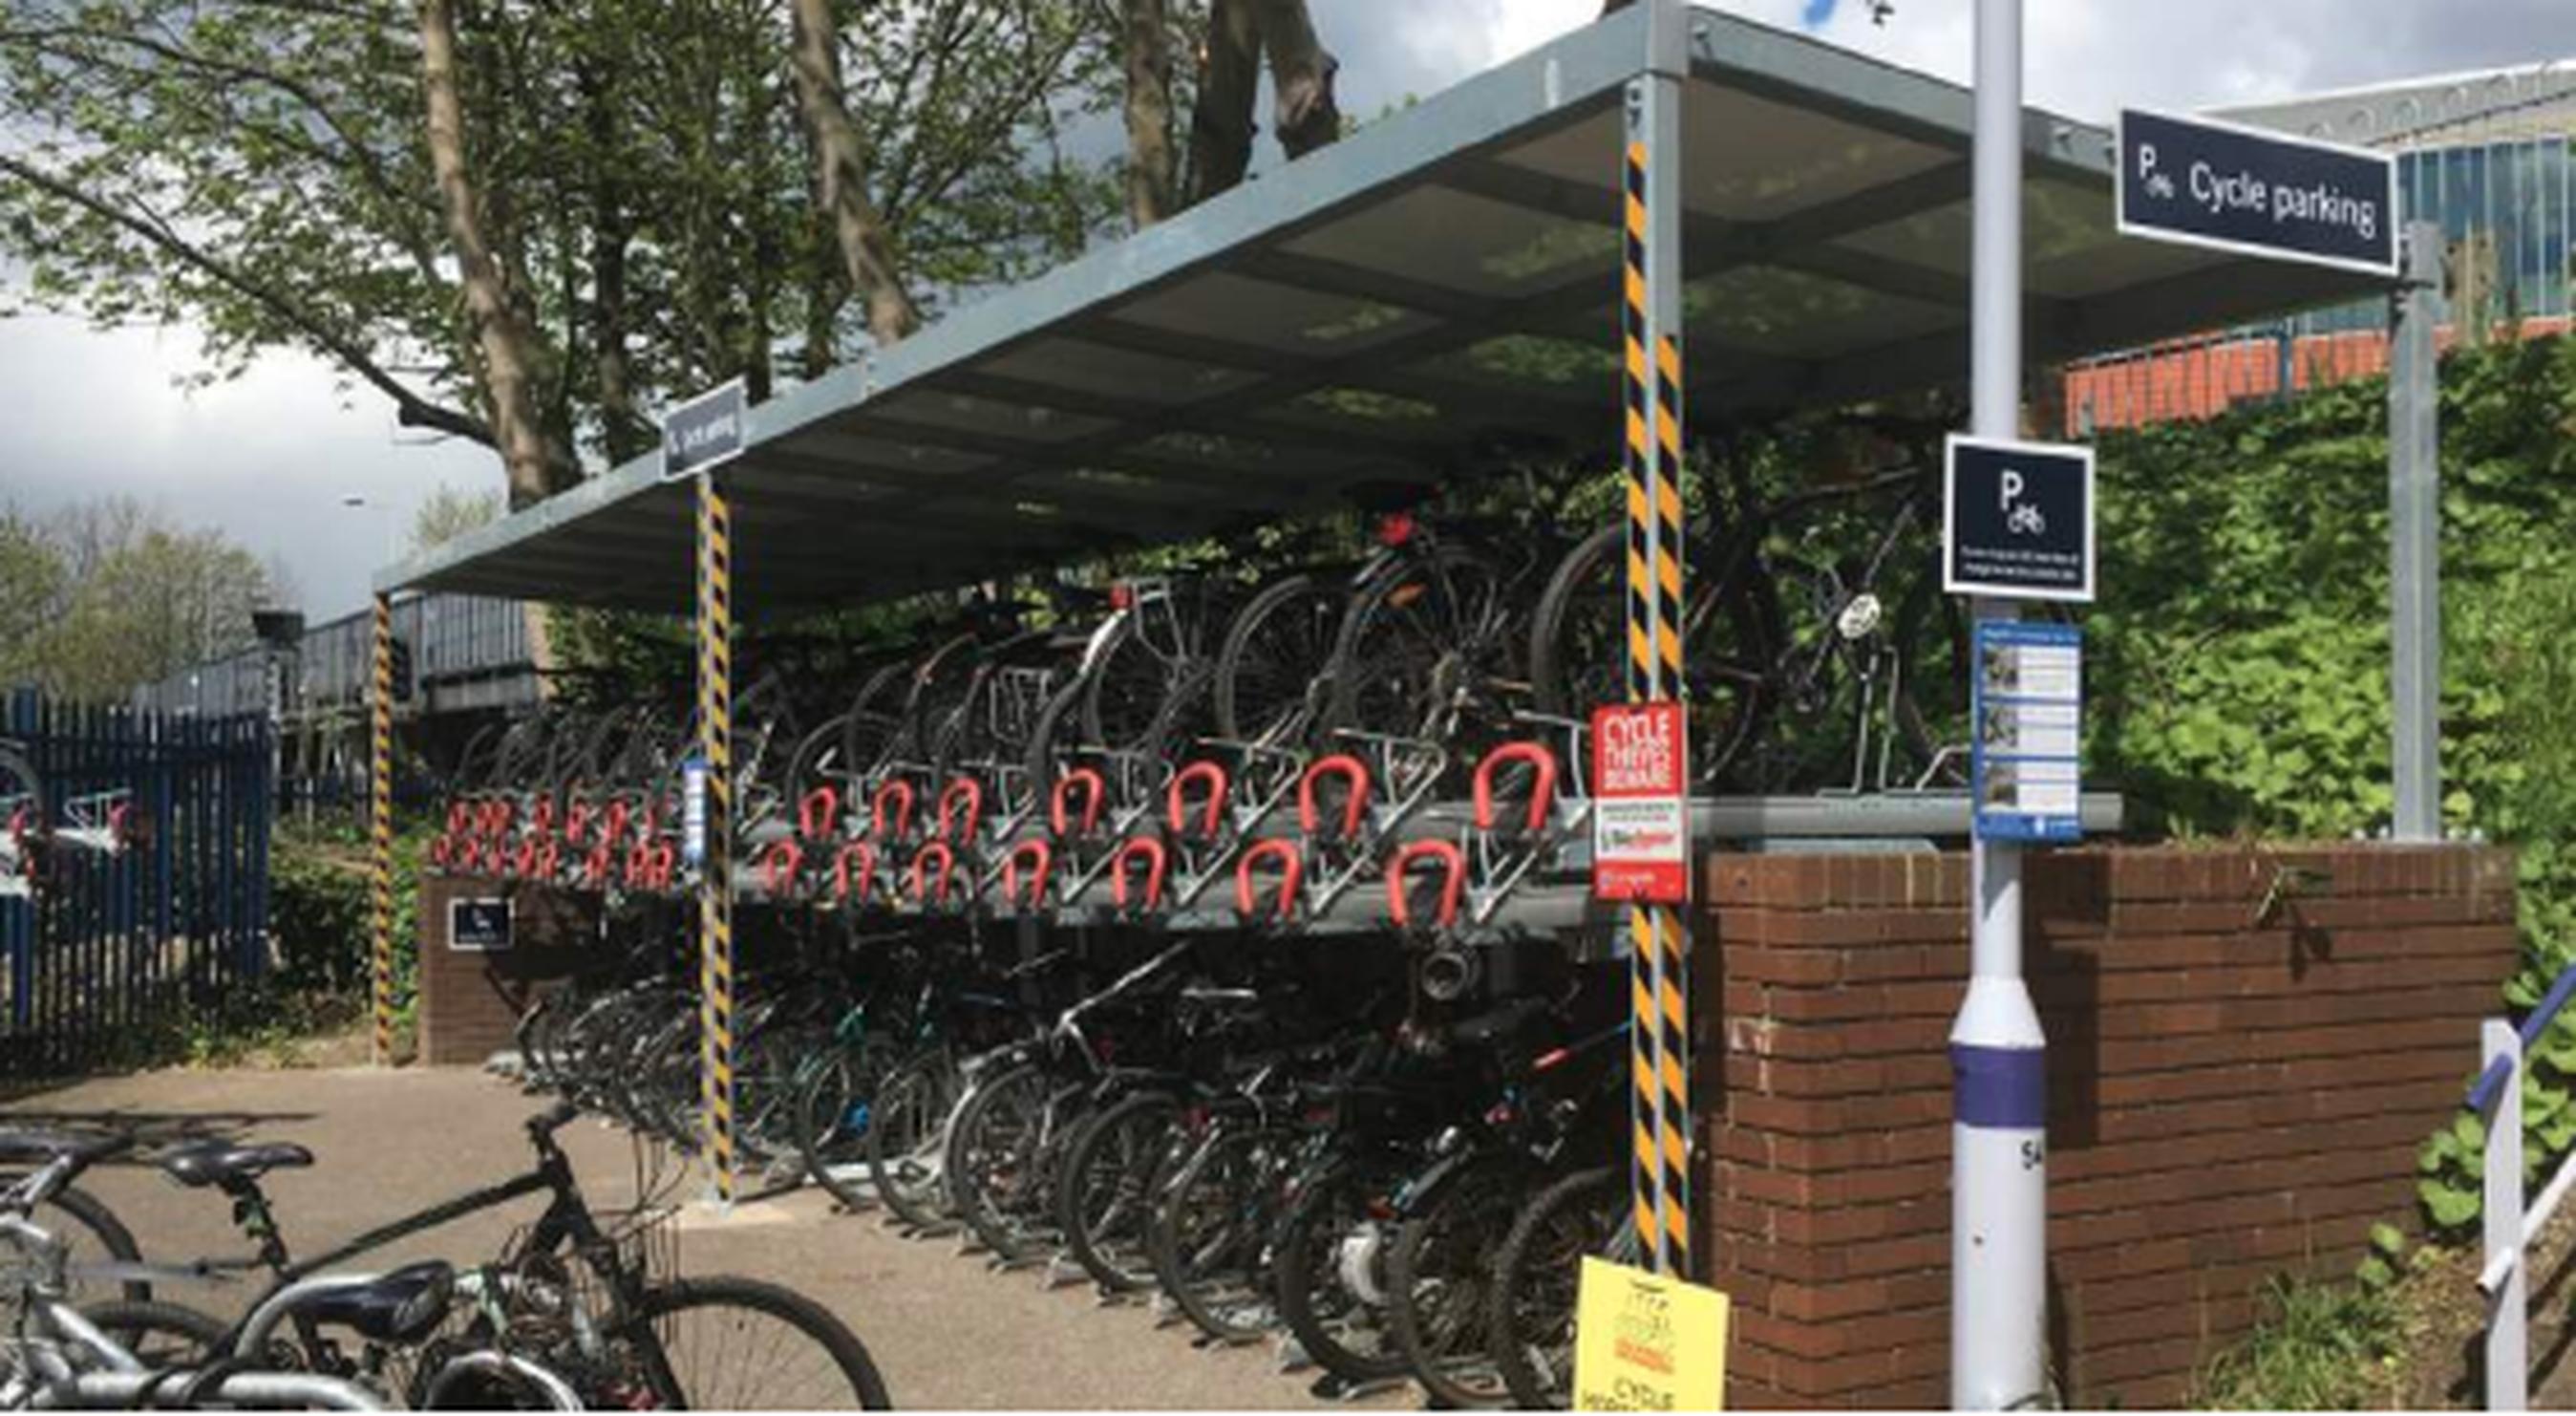 Cycle parking from Cyclepods